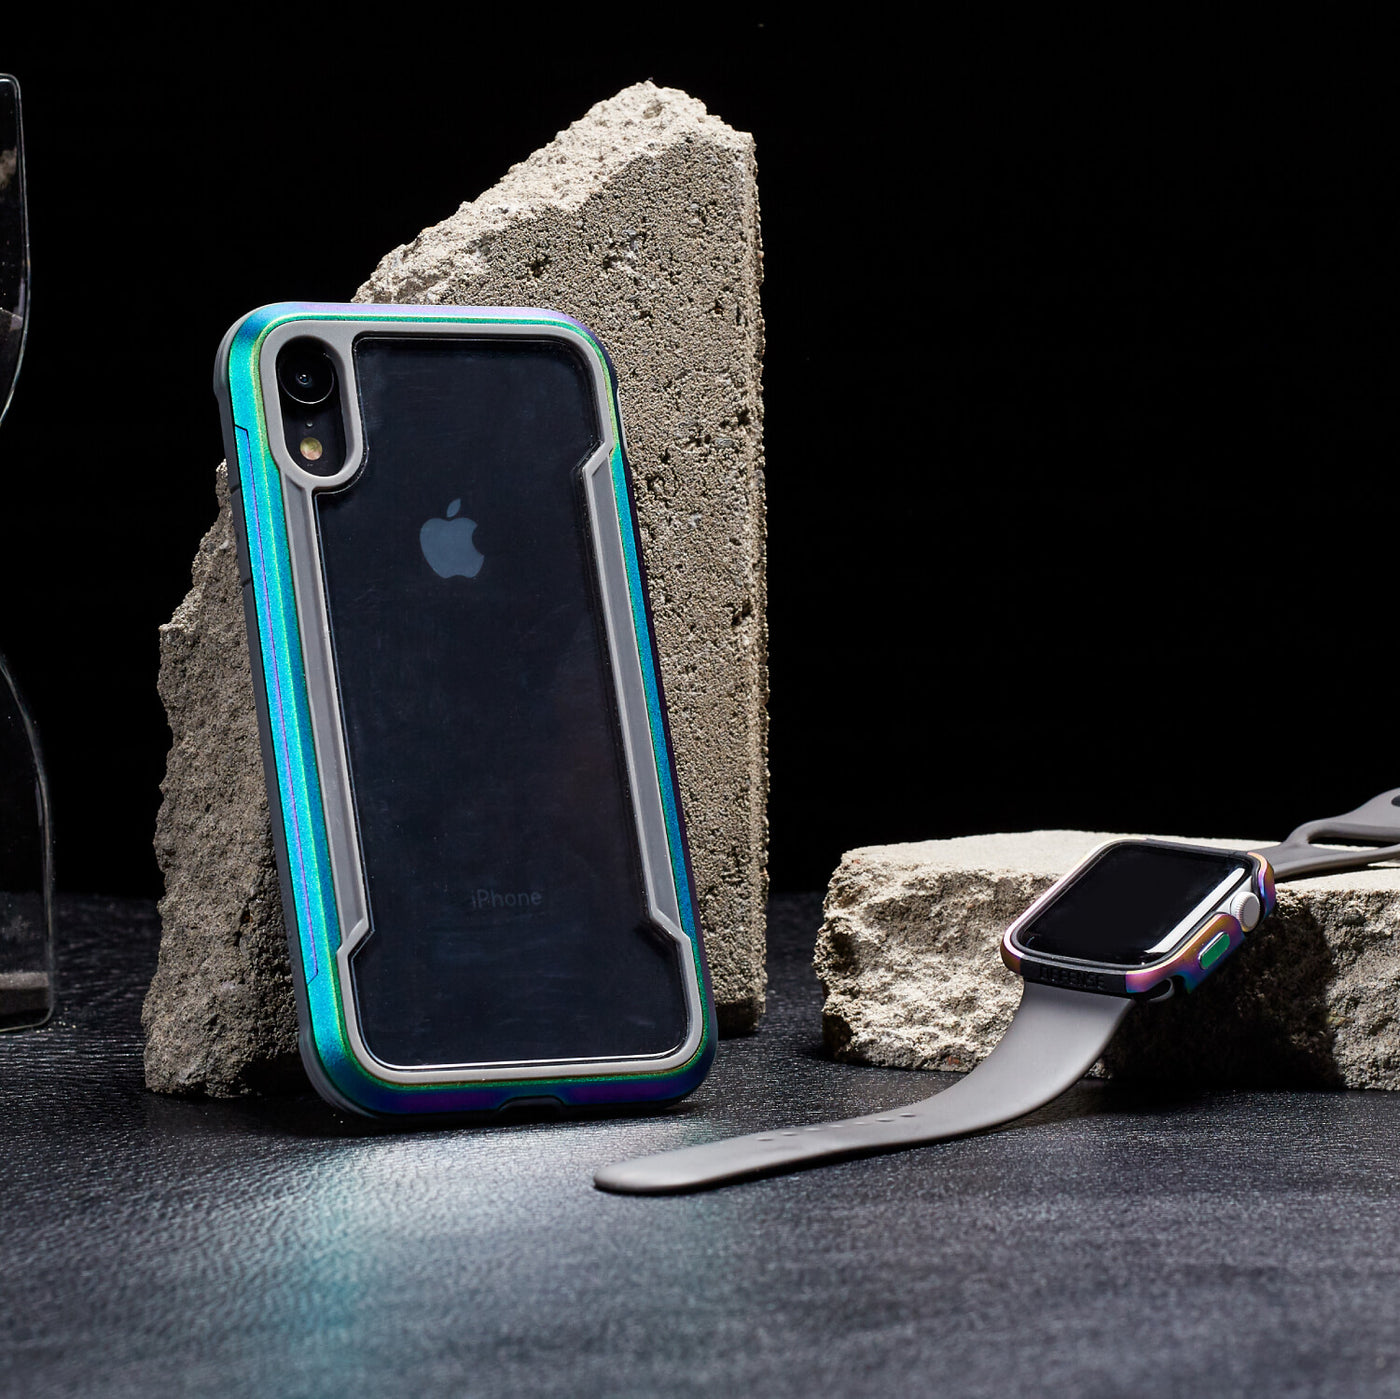 Rugged Case for iPhone XR. Raptic Shield in iridescent.